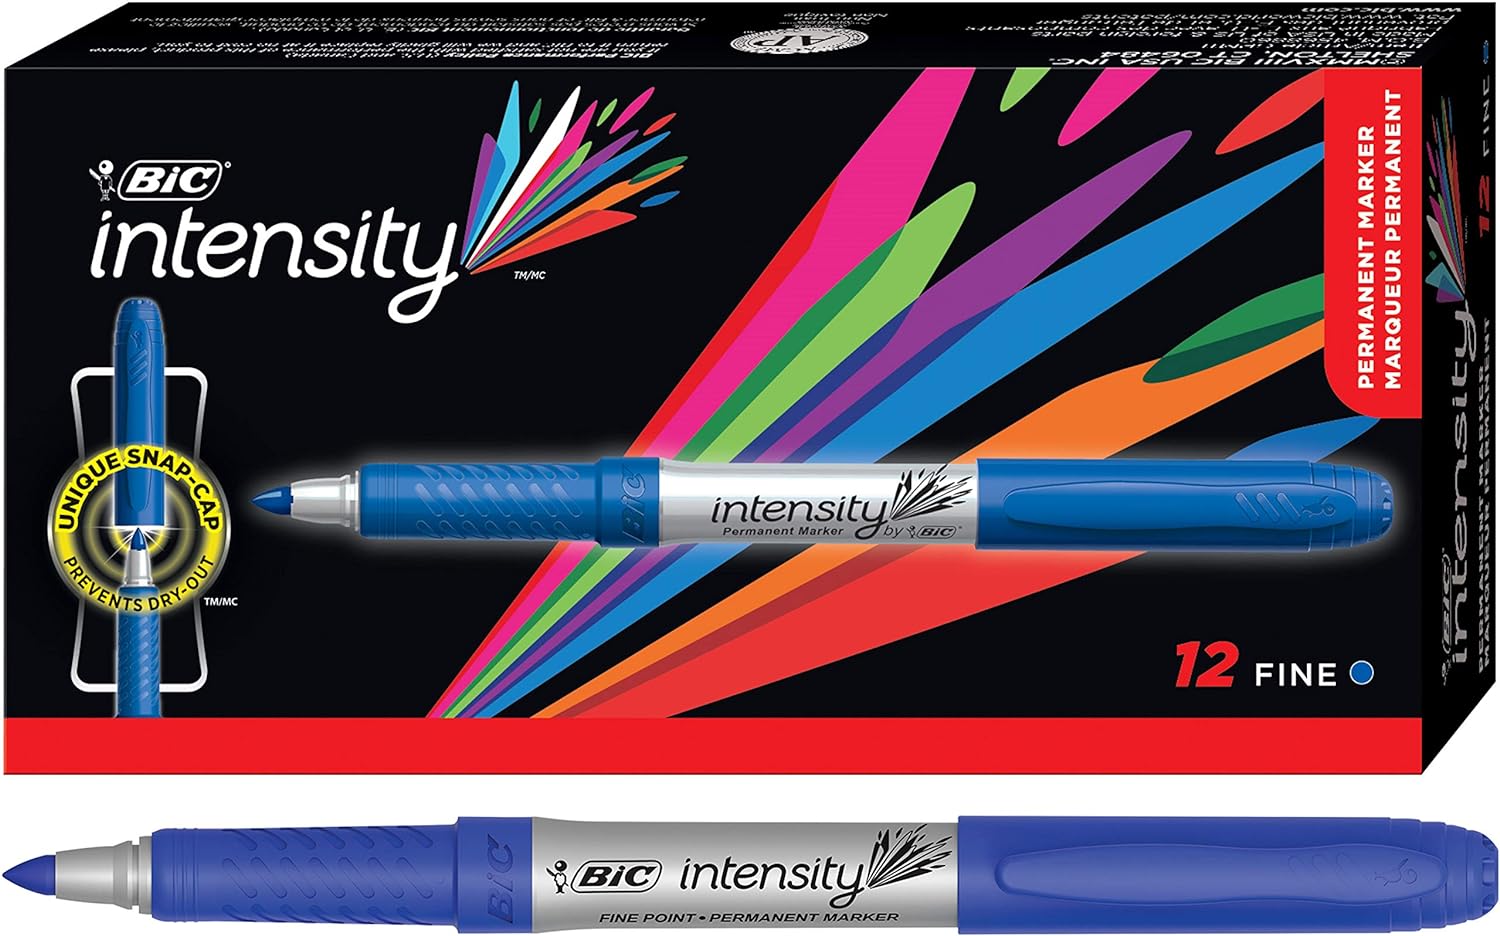 My daughter and I both enjoy using the Bic markers in our adult coloring books.The colors are true to what the cap shows. And the saturation is great. I love the color selection and the gradation this package offers.Excellent product !